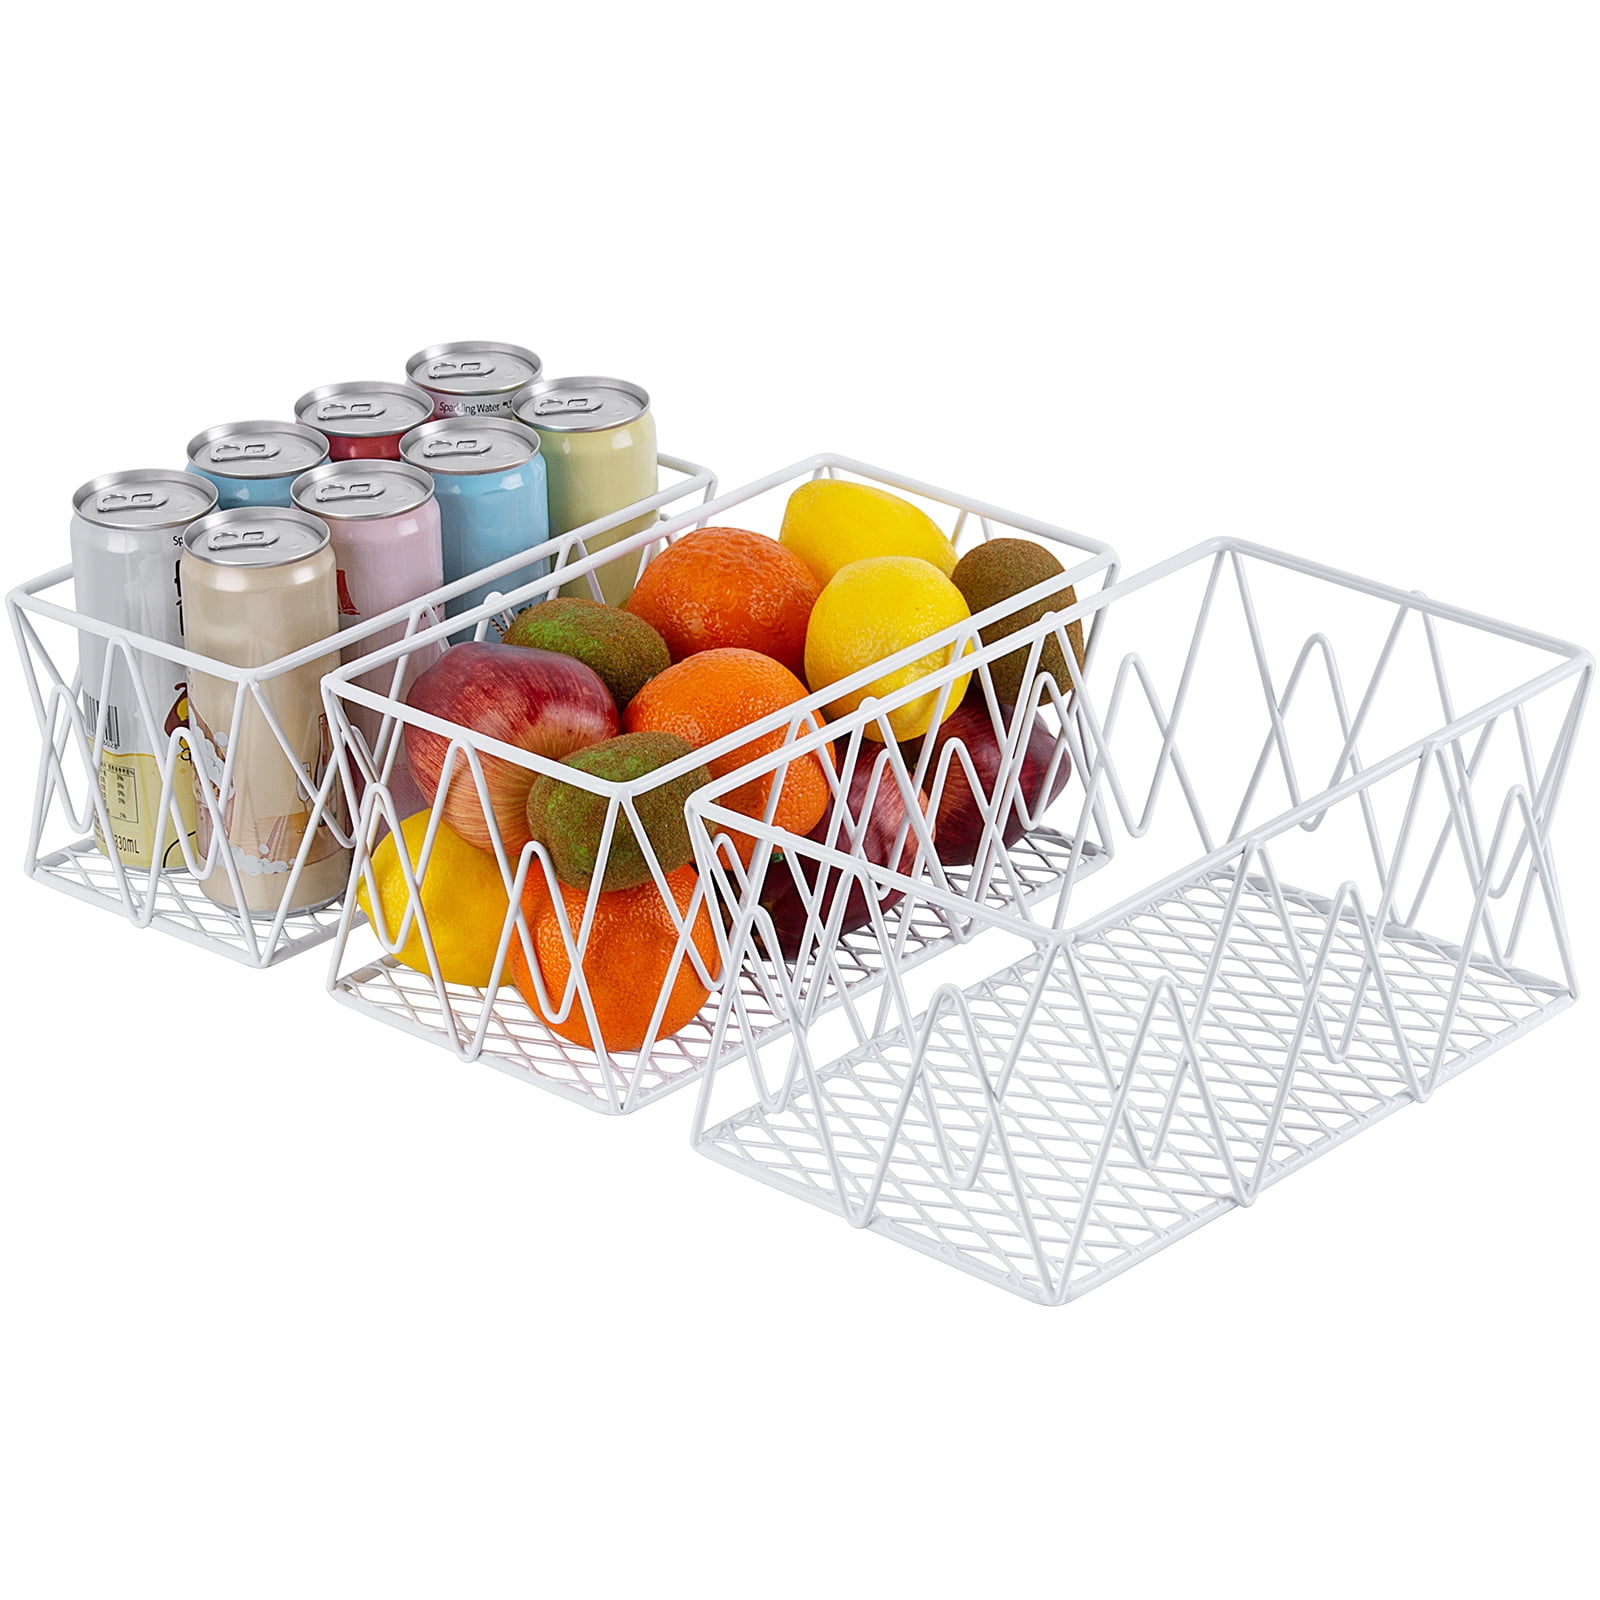 Freezer Baskets for Chest Freezer Stackable Wire Baskets for Storage Pantry  O